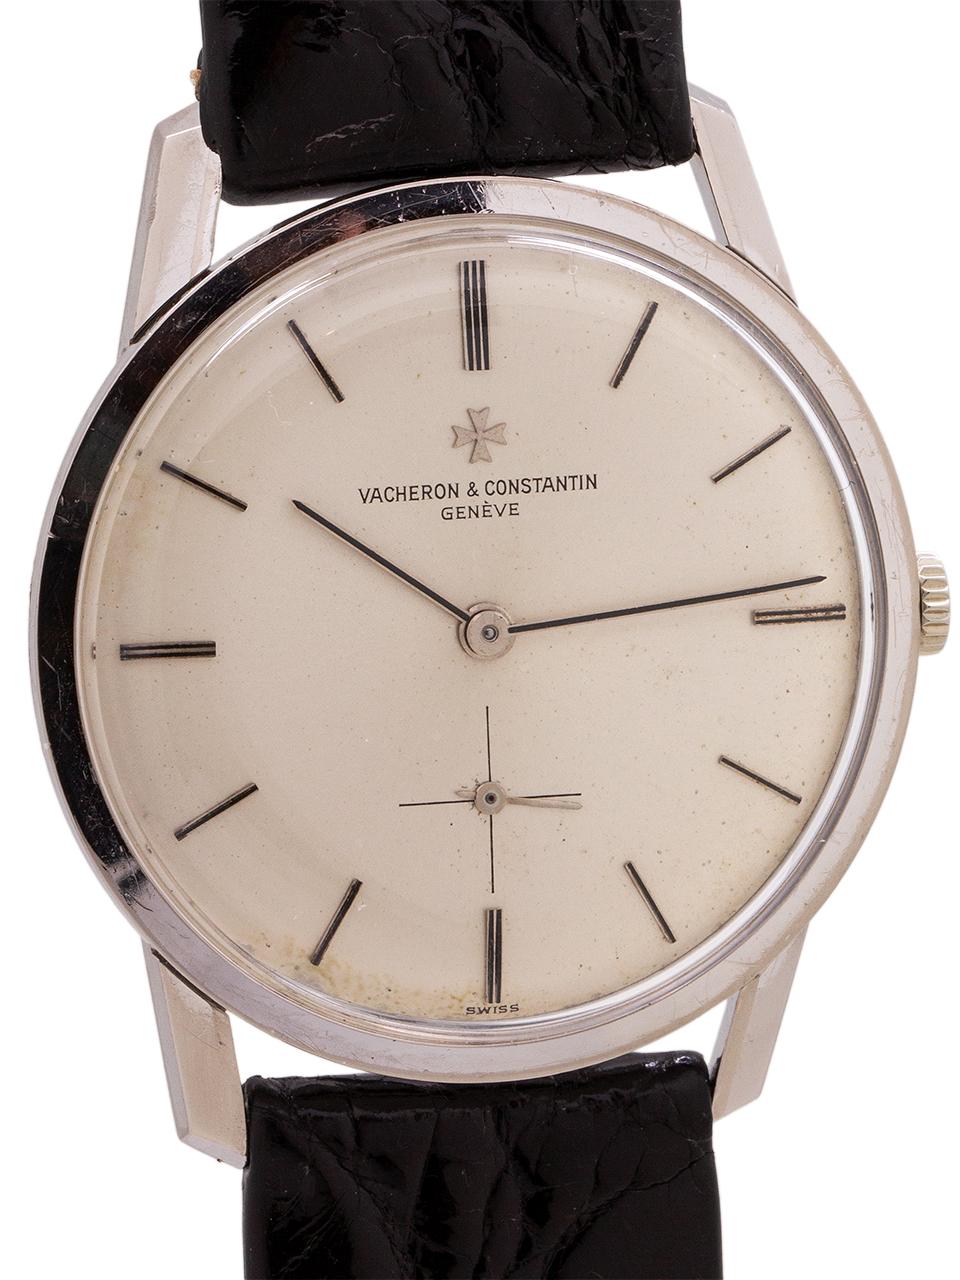   
Beautiful condition example 18K white gold Vacheron & Constantin  circa 1950’s. Featuring a 34mm heavy case with snap down case back, thin slanted lugs, and acrylic crystal. With beautiful condition original matte silver dial with applied indexes